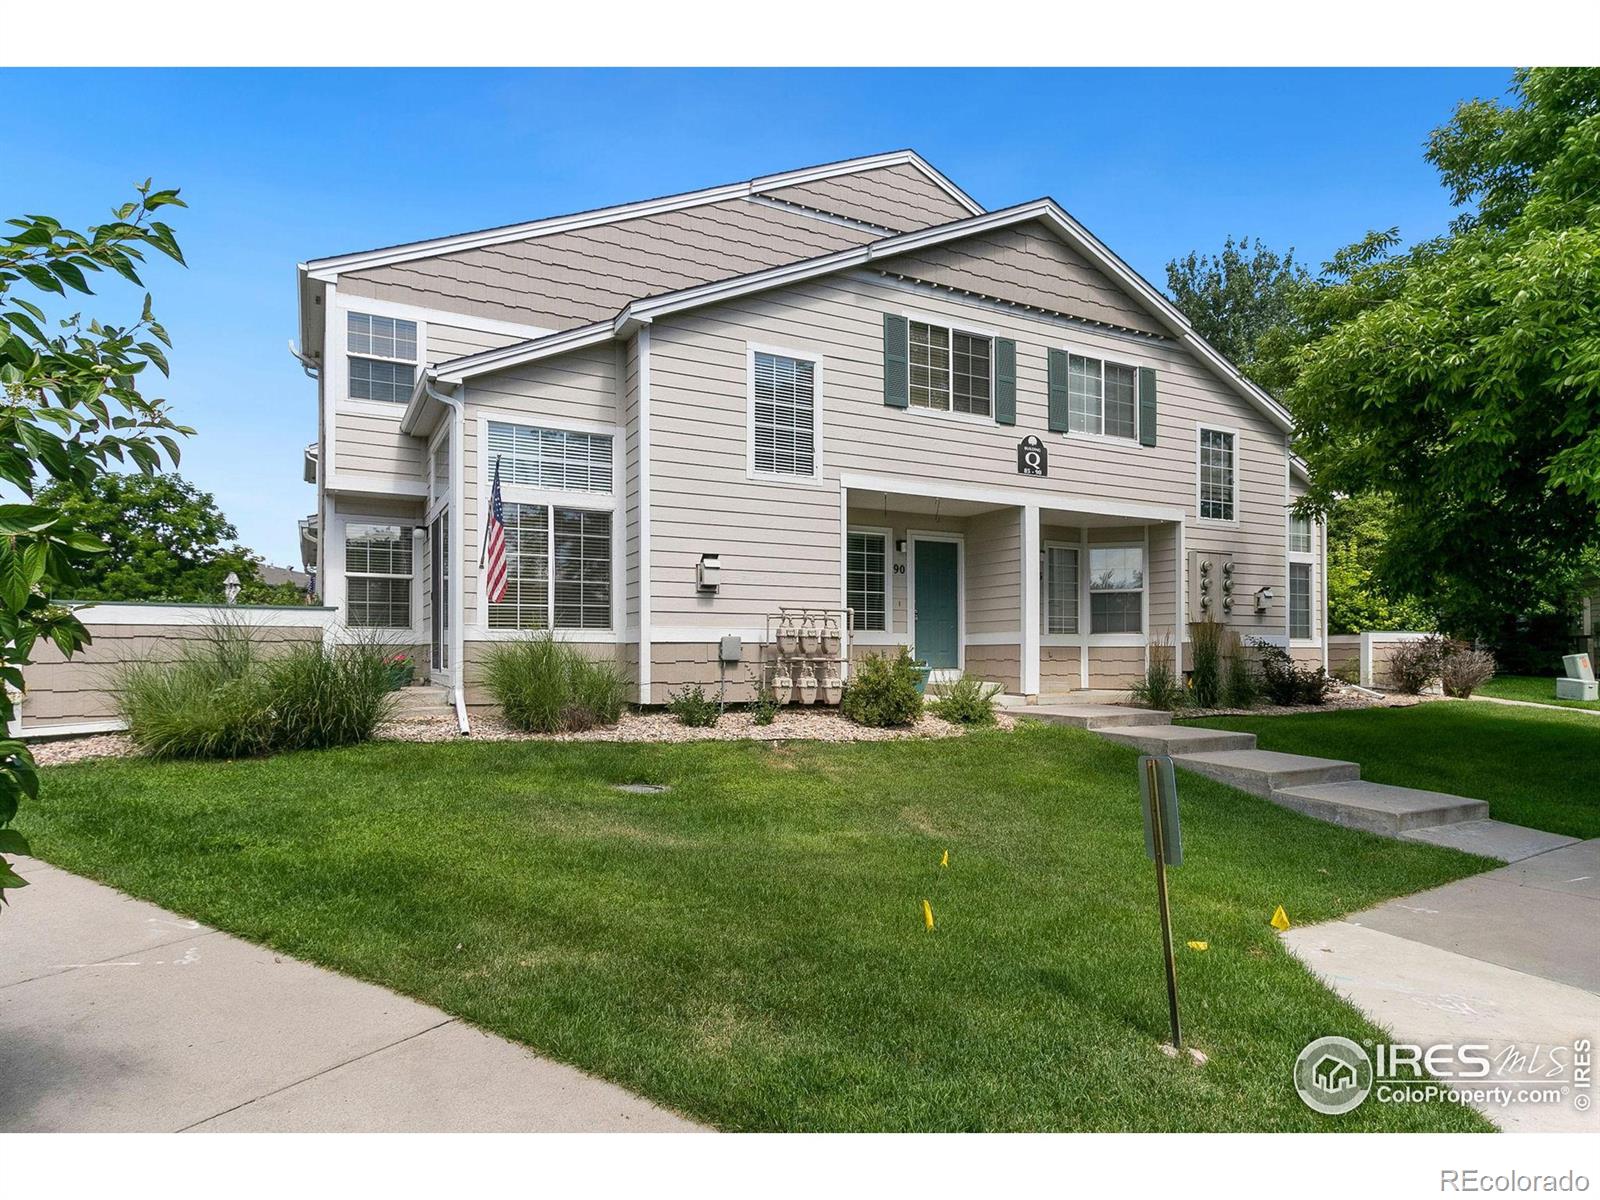 2502  Timberwood Drive, fort collins MLS: 123456789993667 Beds: 3 Baths: 3 Price: $400,000